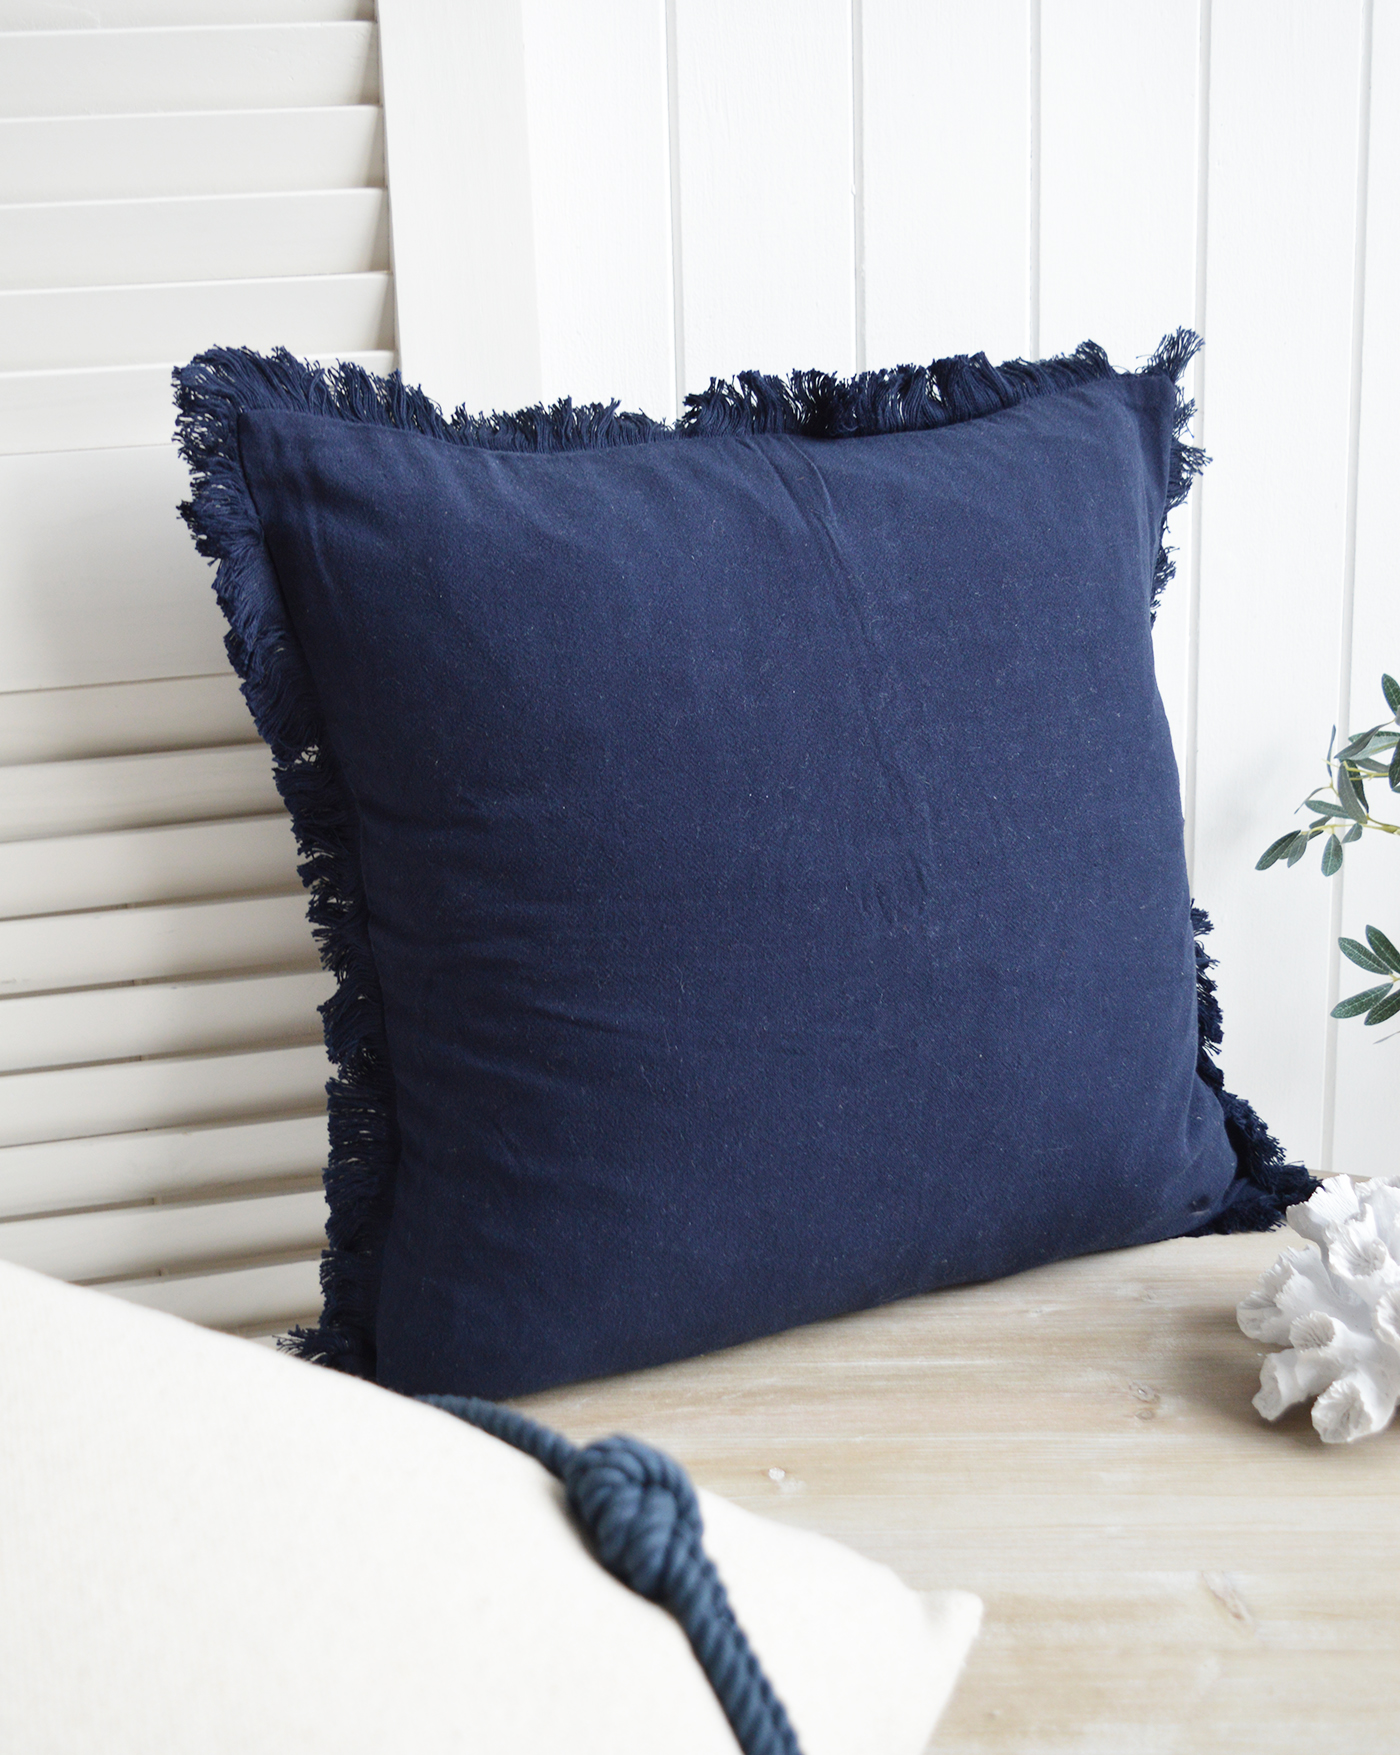 New England Style Country, Coastal and White Furniture and accessories for the home. Hamptons and New England coastal cushions and soft furnishings - Lexington Navy Blue CUshion Cover